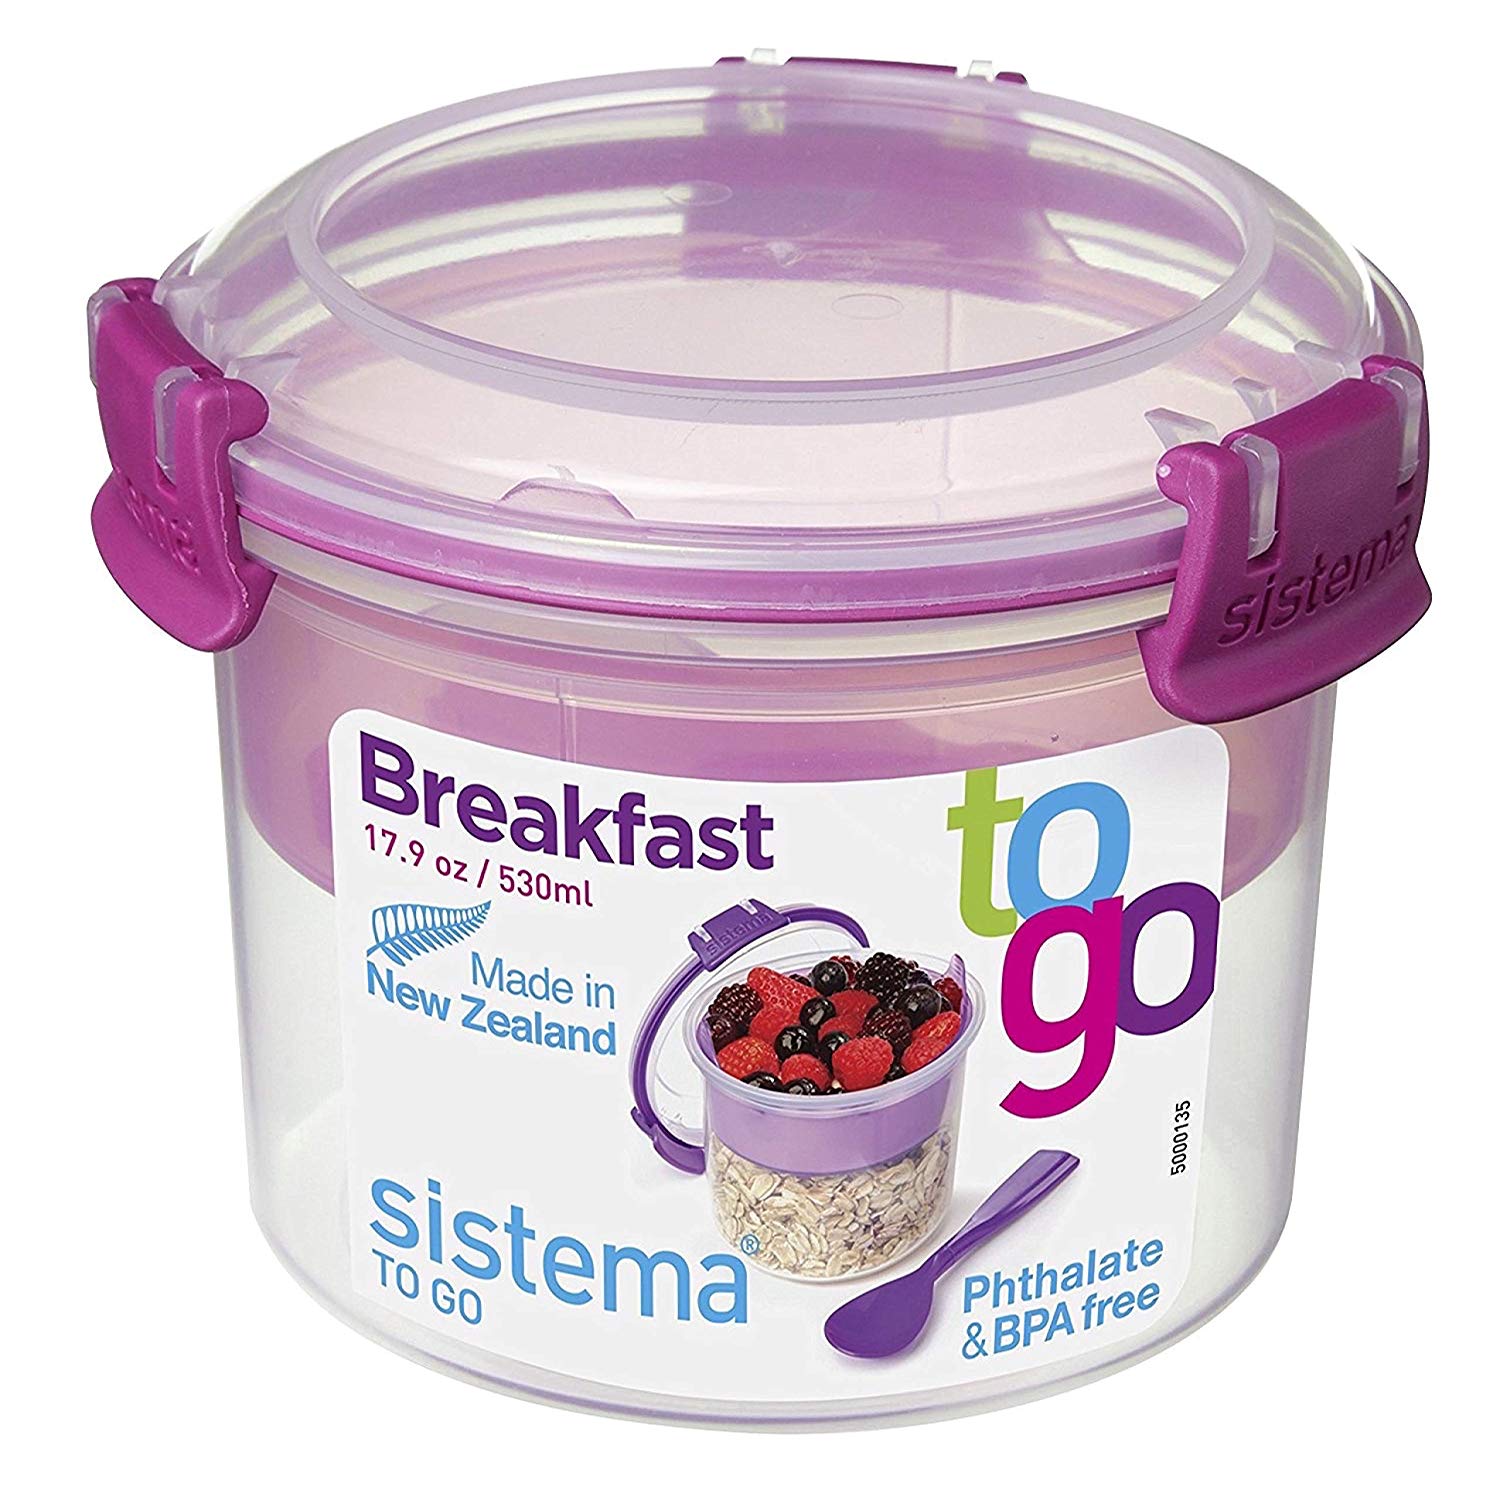 Sistema Breakfast Cereal Bowl to go - oddgifts.com